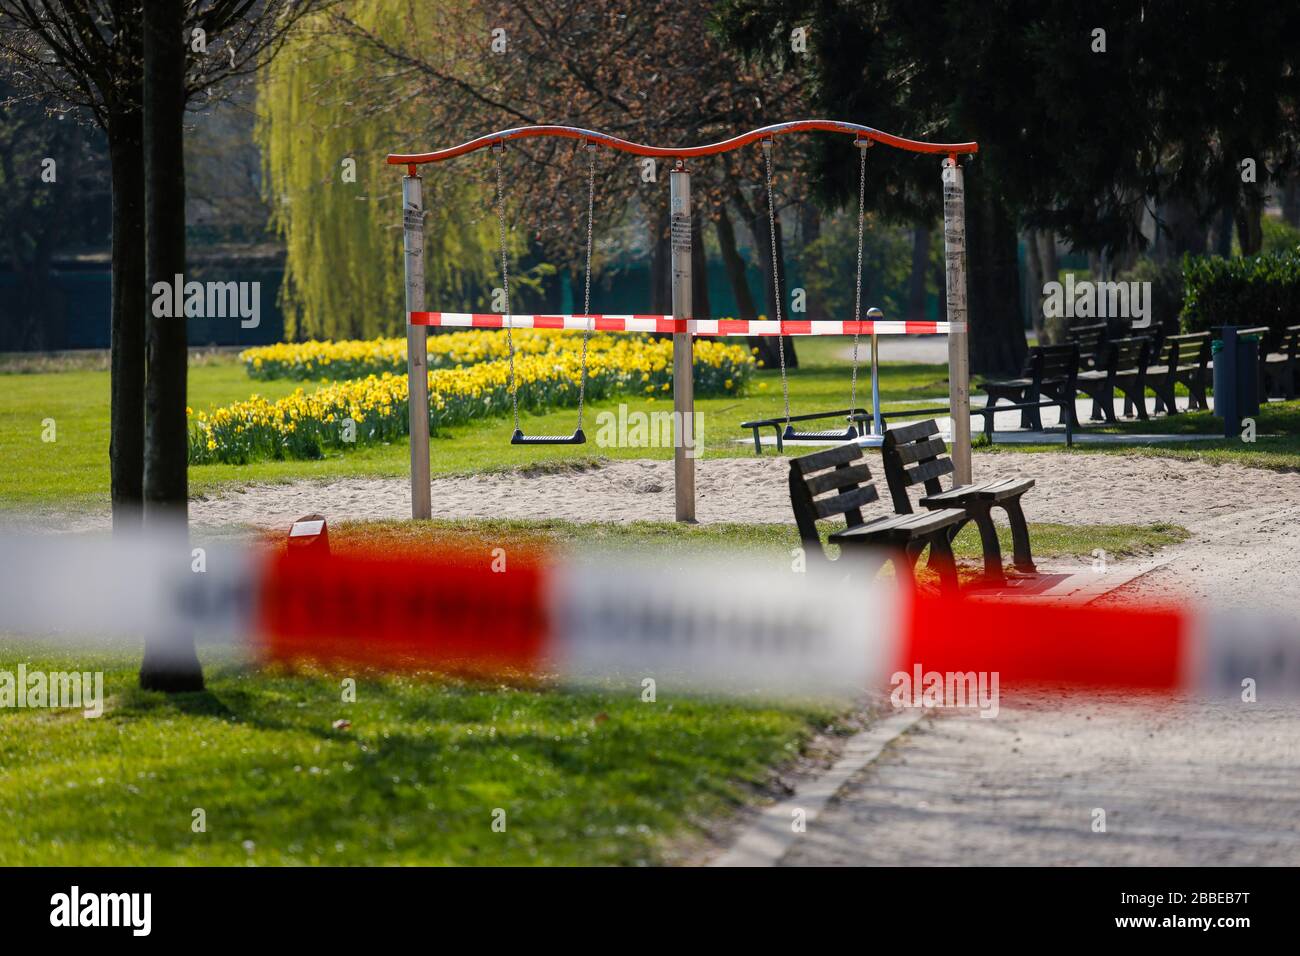 Essen, Ruhr Area, North Rhine-Westphalia, Germany - Contact ban due to Corona Pandemic, the park at Haumannplatz was closed because too many citizens Stock Photo